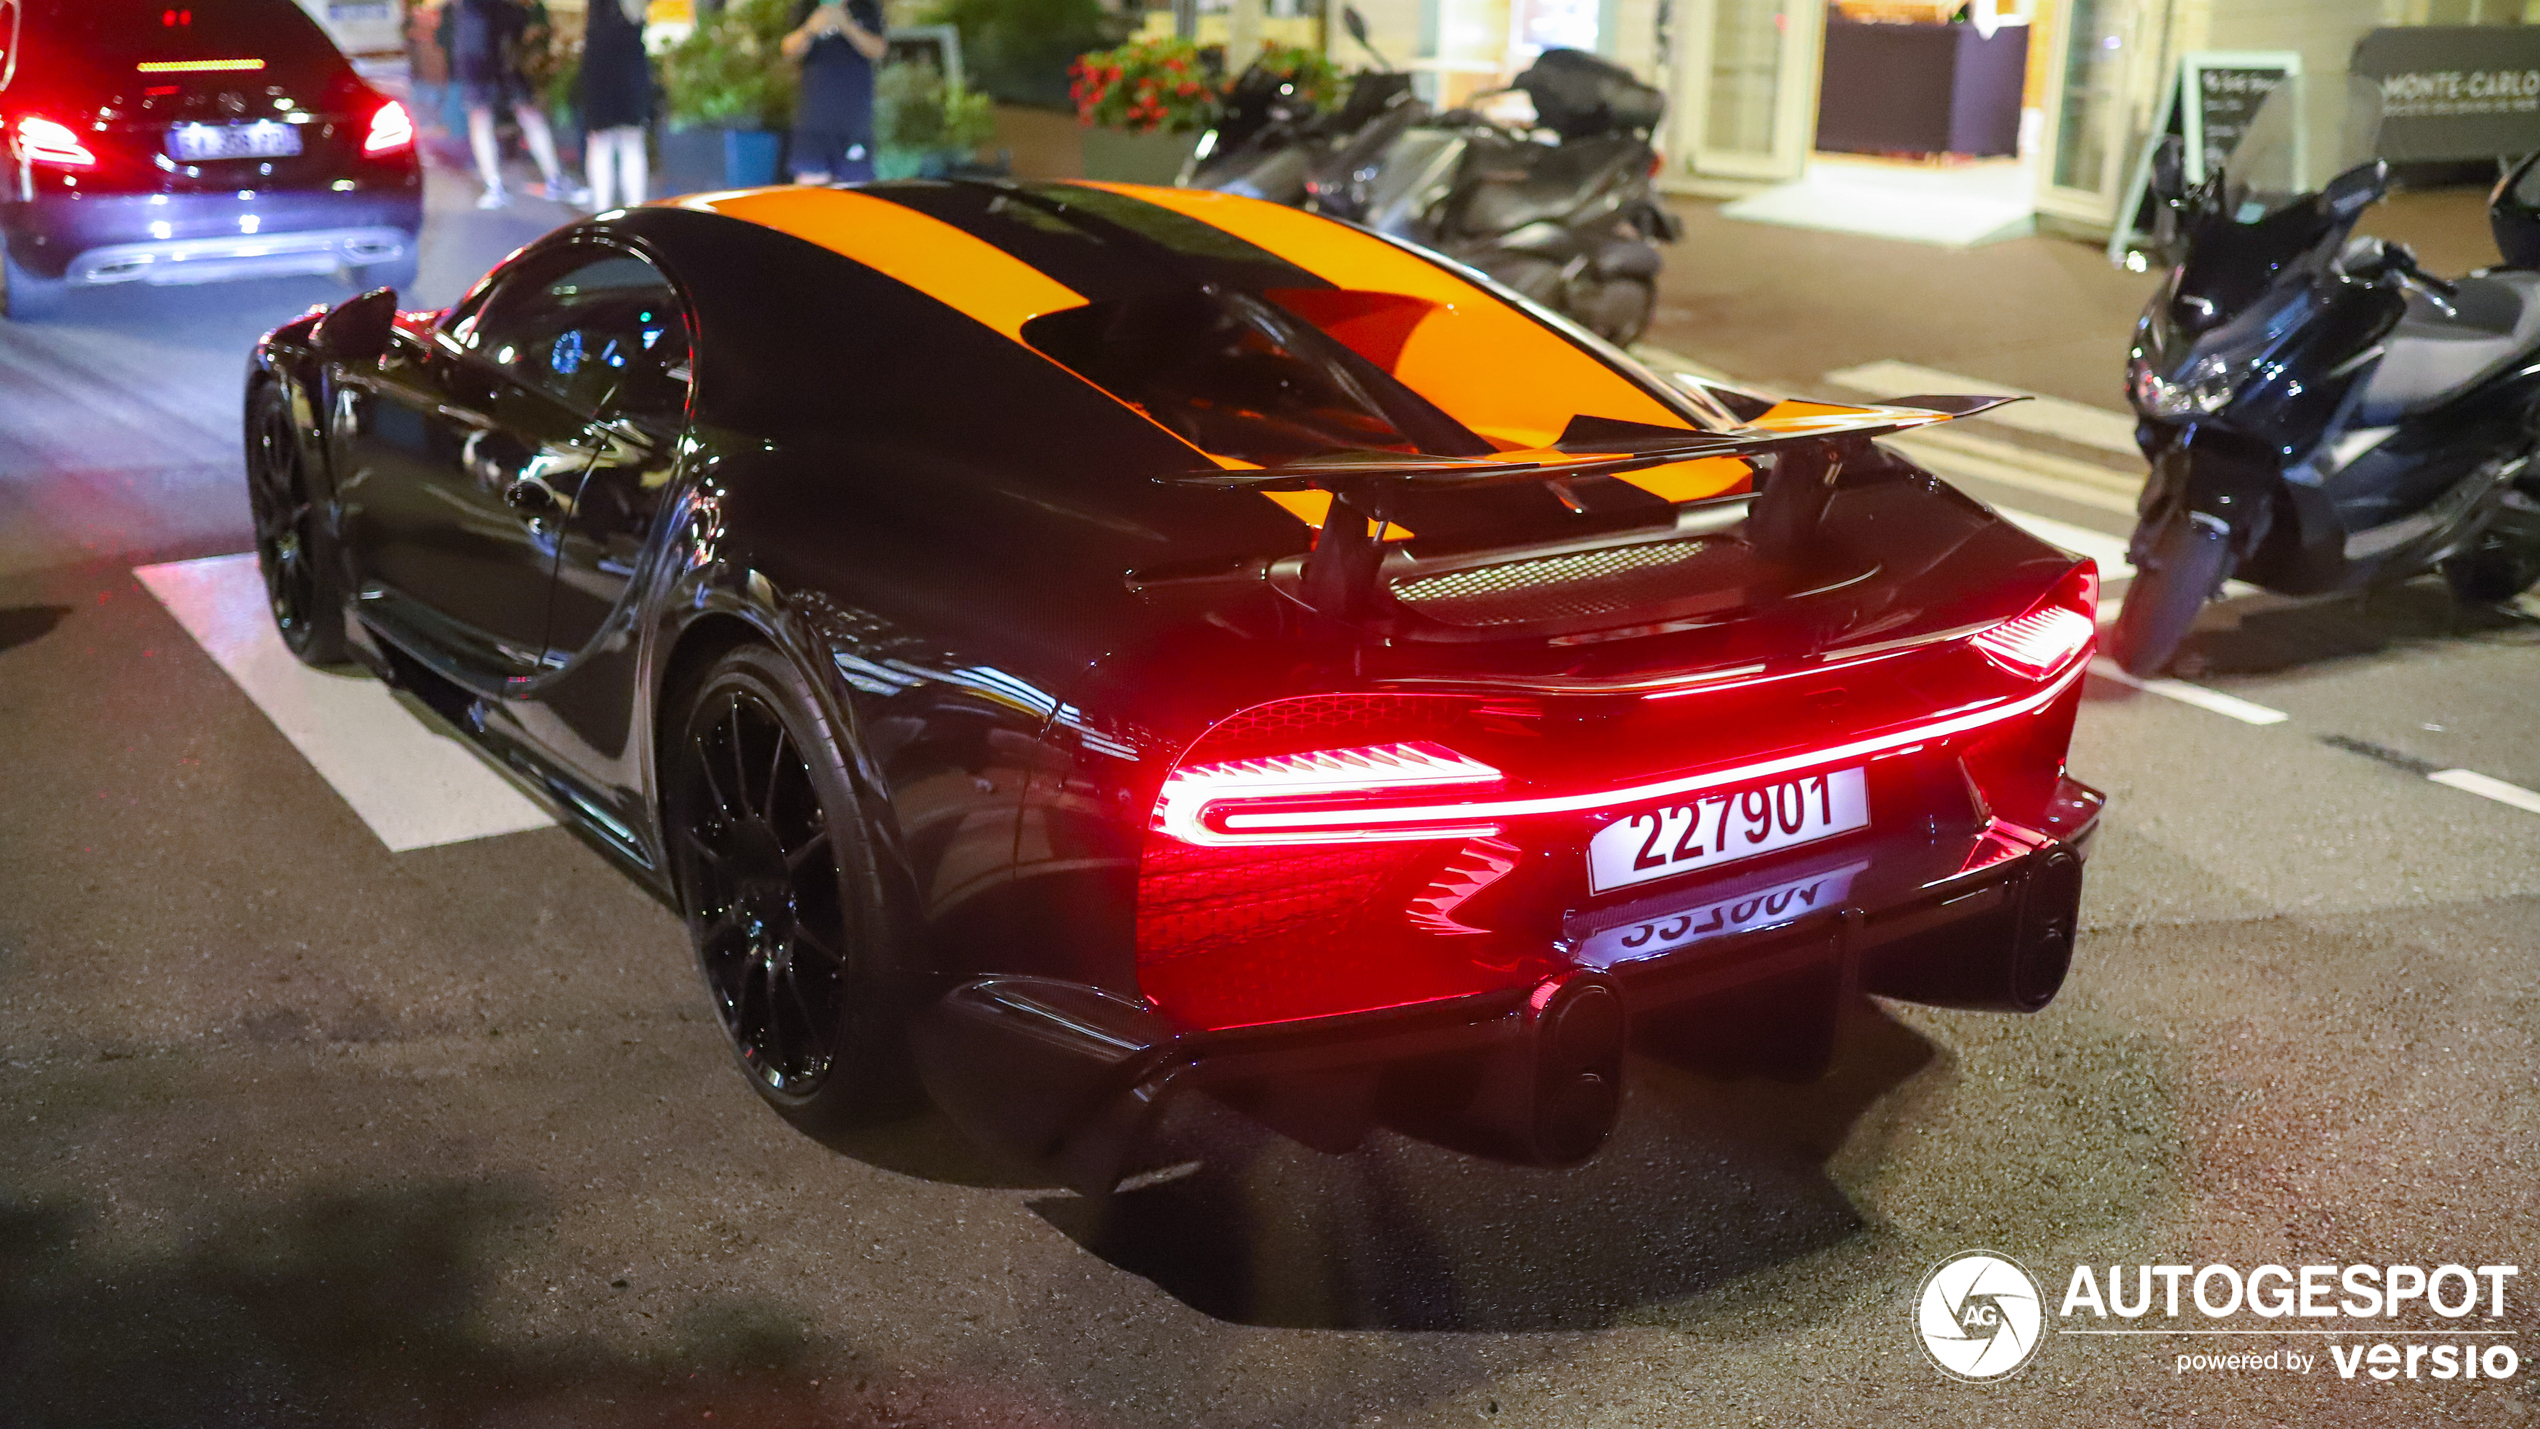 As soon as it gets dark in monaco, there will see new bugattis